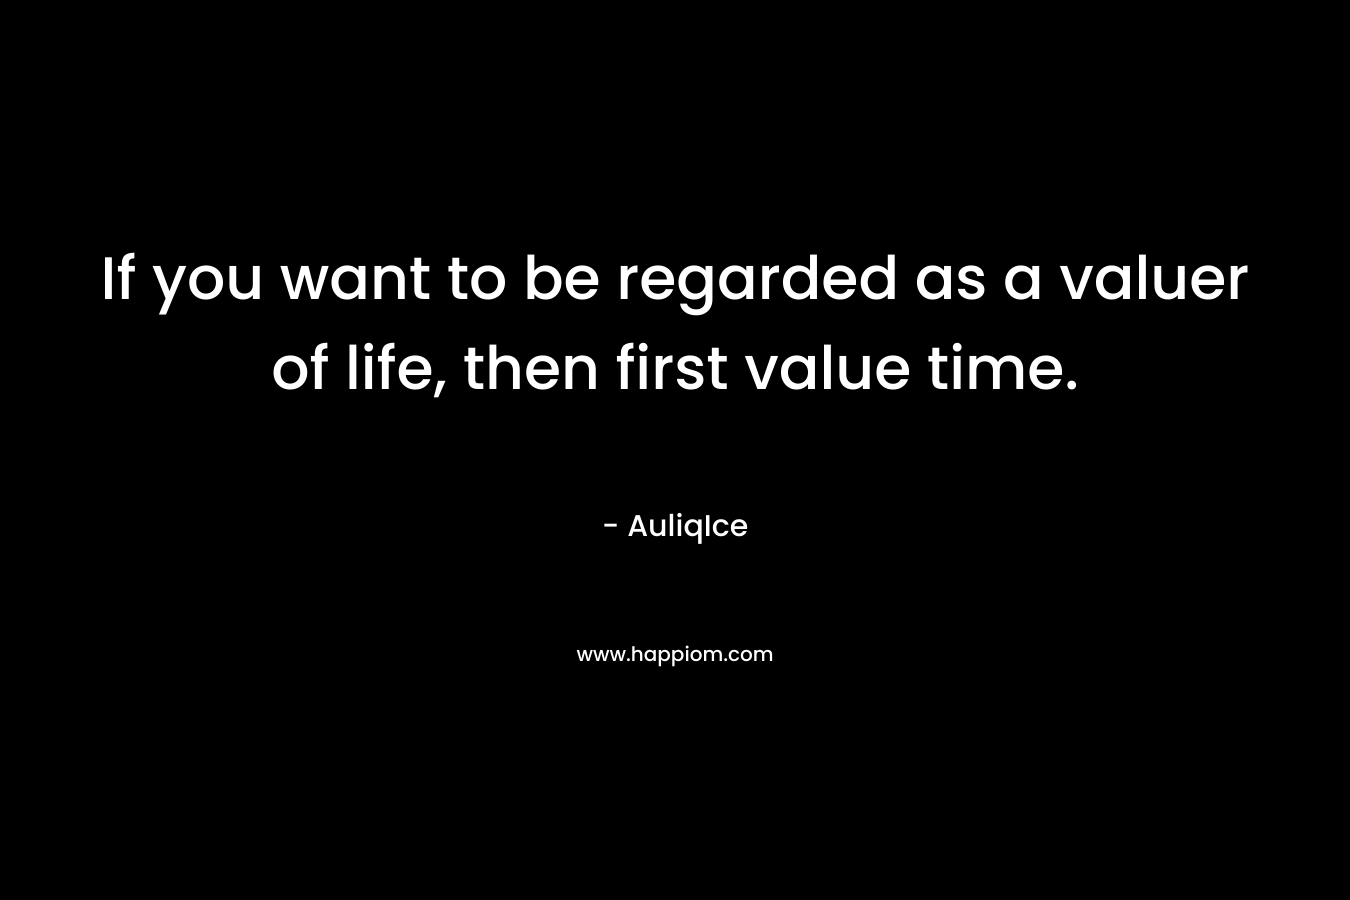 If you want to be regarded as a valuer of life, then first value time.